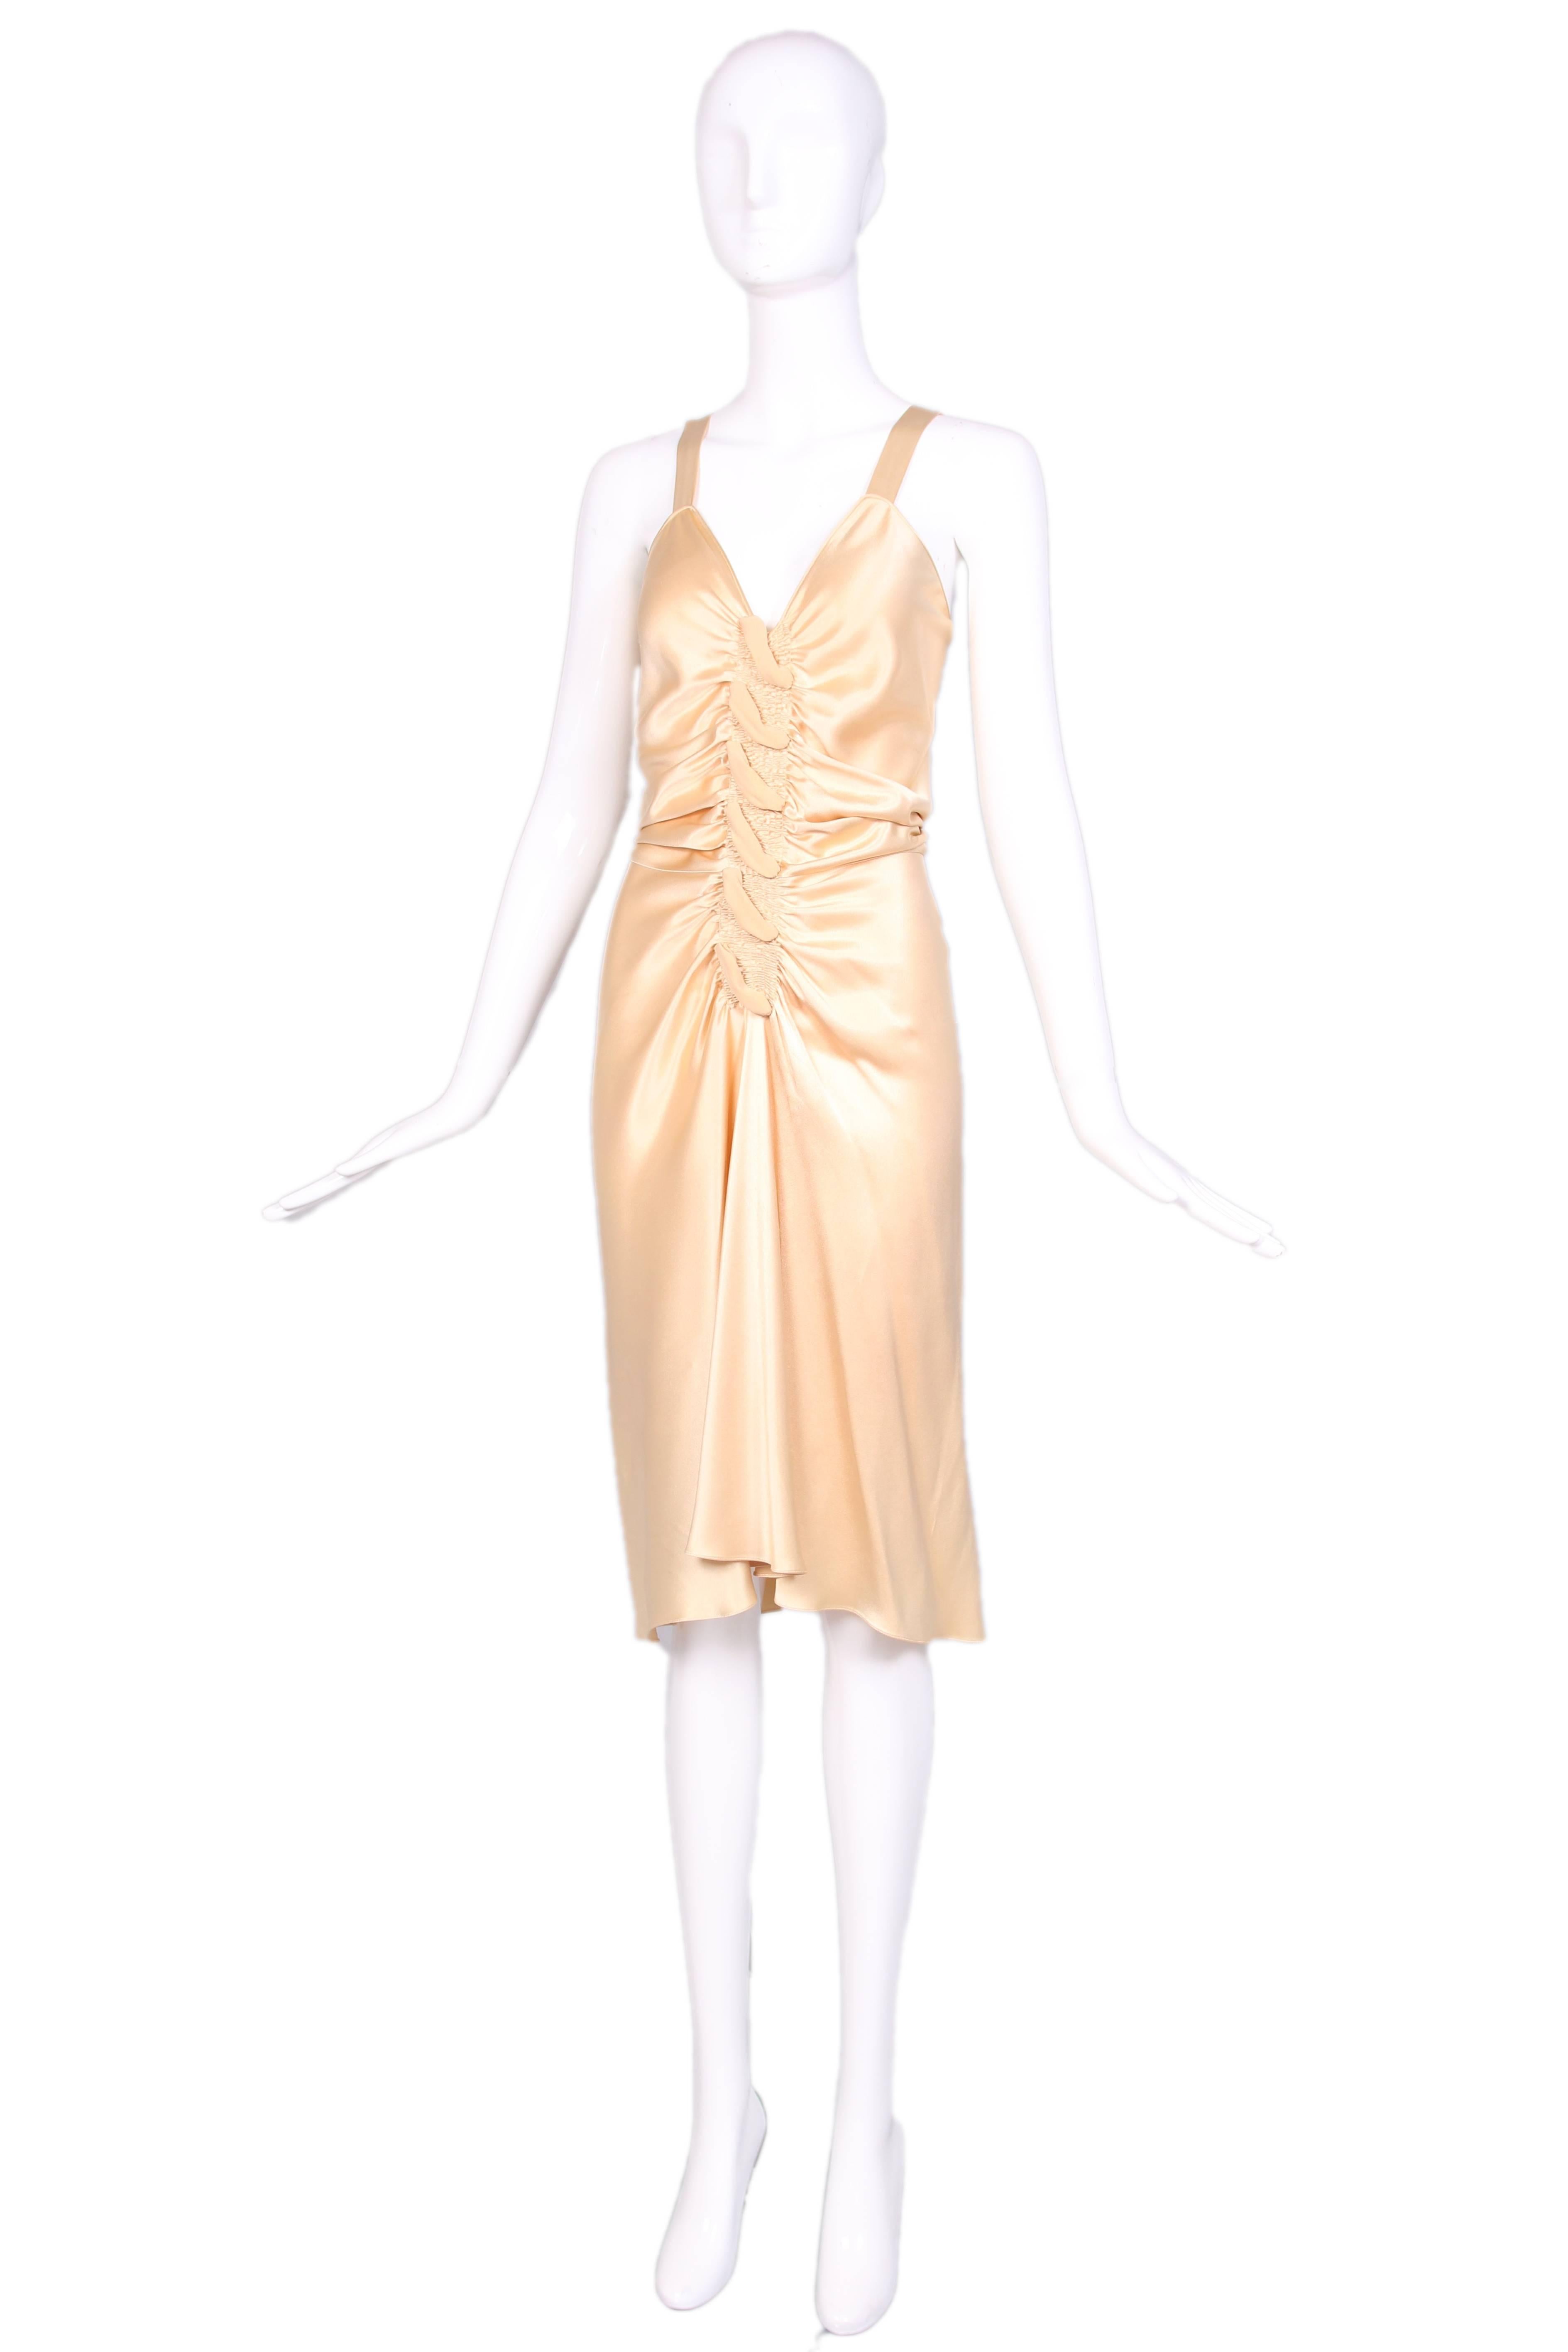 John Galliano Hollywood glamorous cream bias cut evening dress with button up back and ruched detailing at front. In excellent condition with some minor abrasions hidden in folds at the back. Size US 4.
MEASUREMENTS: 
Bust - 32